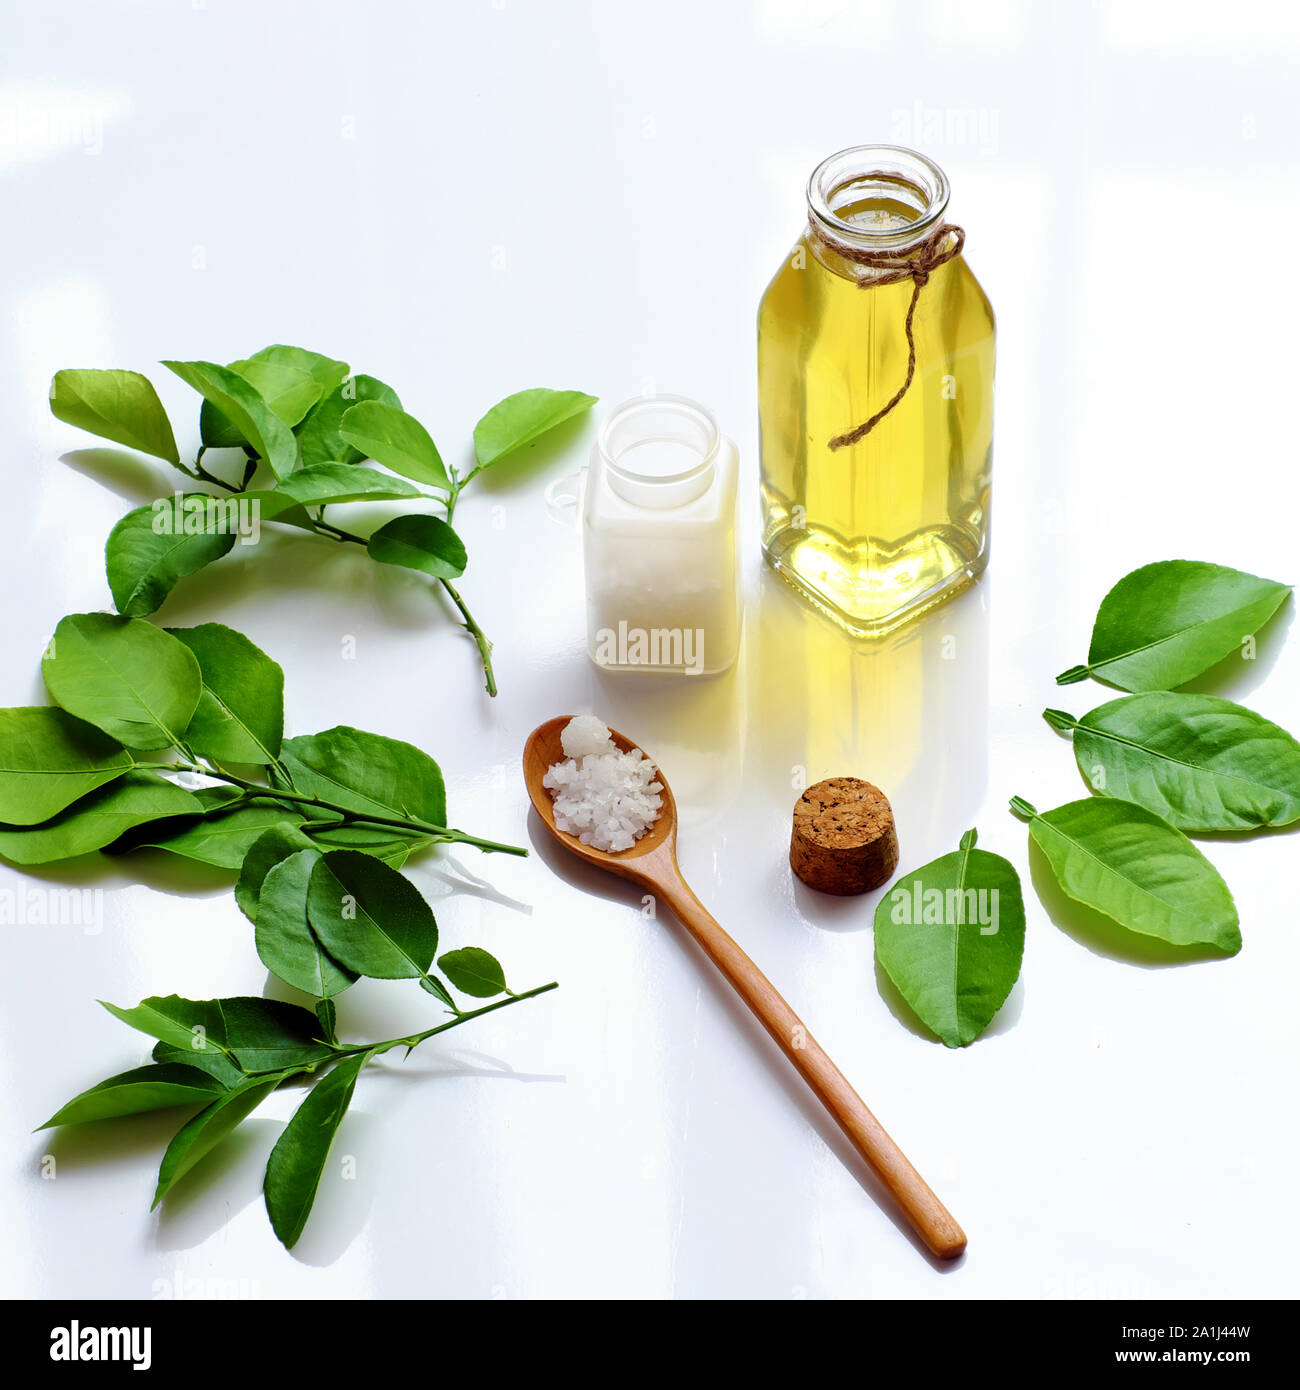 Homemade natural herbal oral care product from lemon leaves, salt boil with water make mouthwash for dental hygiene, treatment bacteria in oral cavity Stock Photo